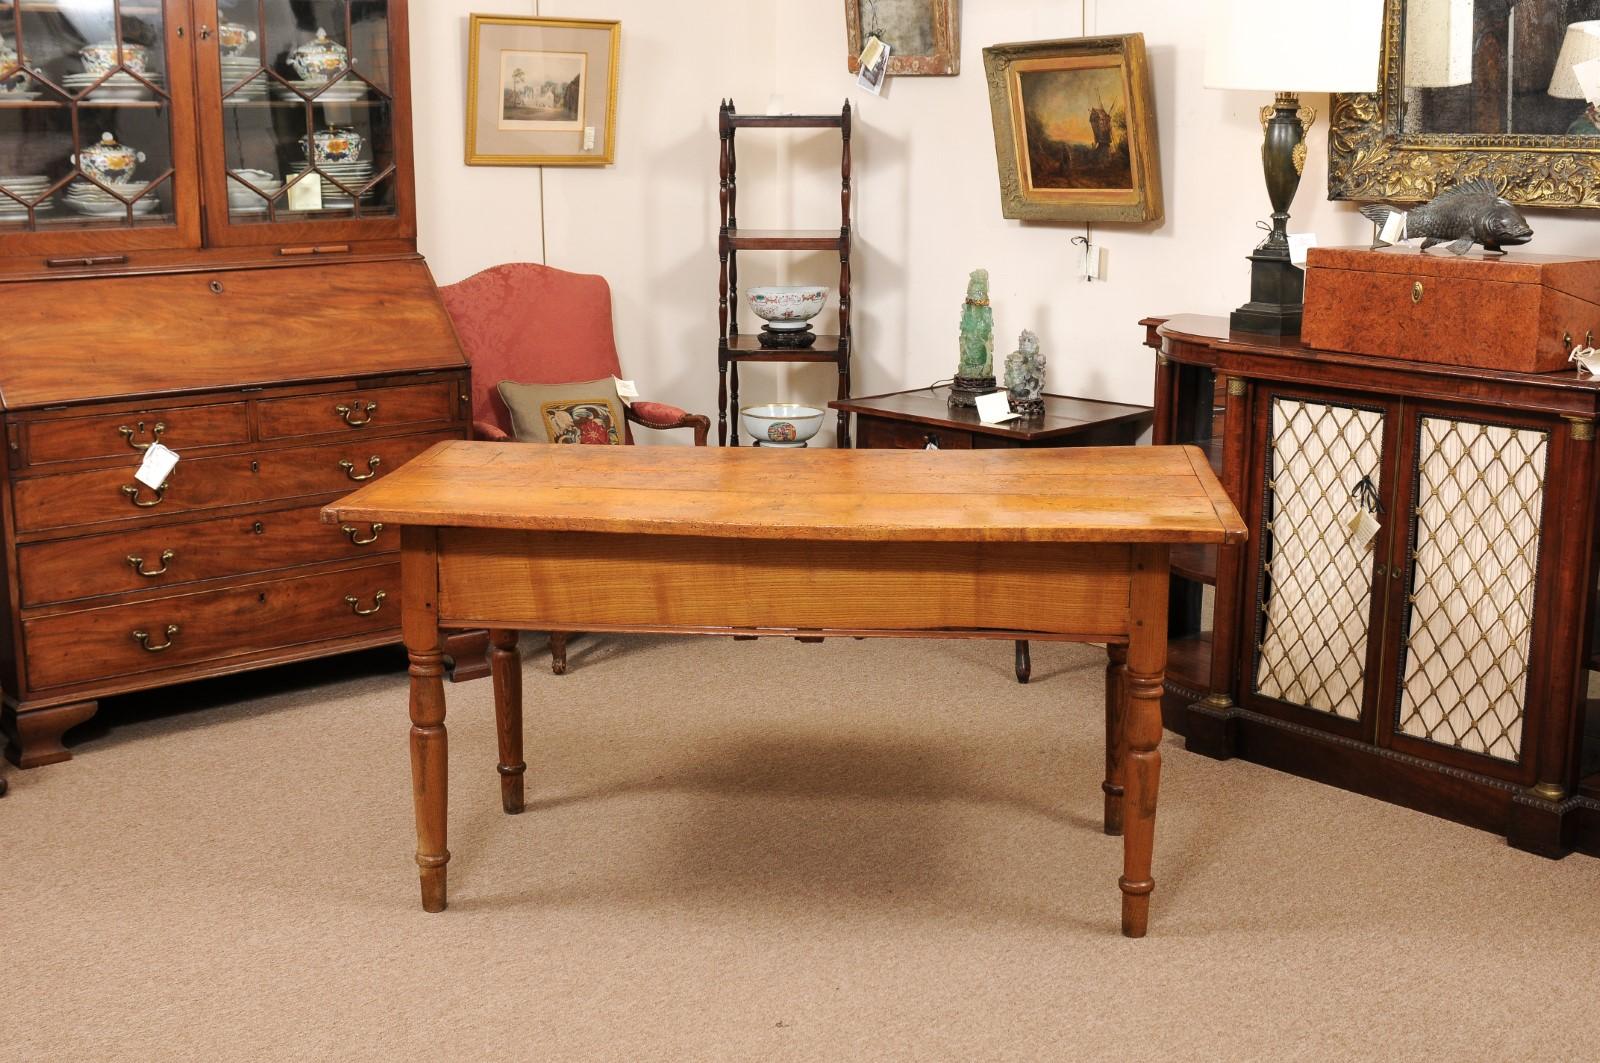 Large American Pine Kitchen Table with 2 Deep Drawers and Turned Legs, c1890 For Sale 4